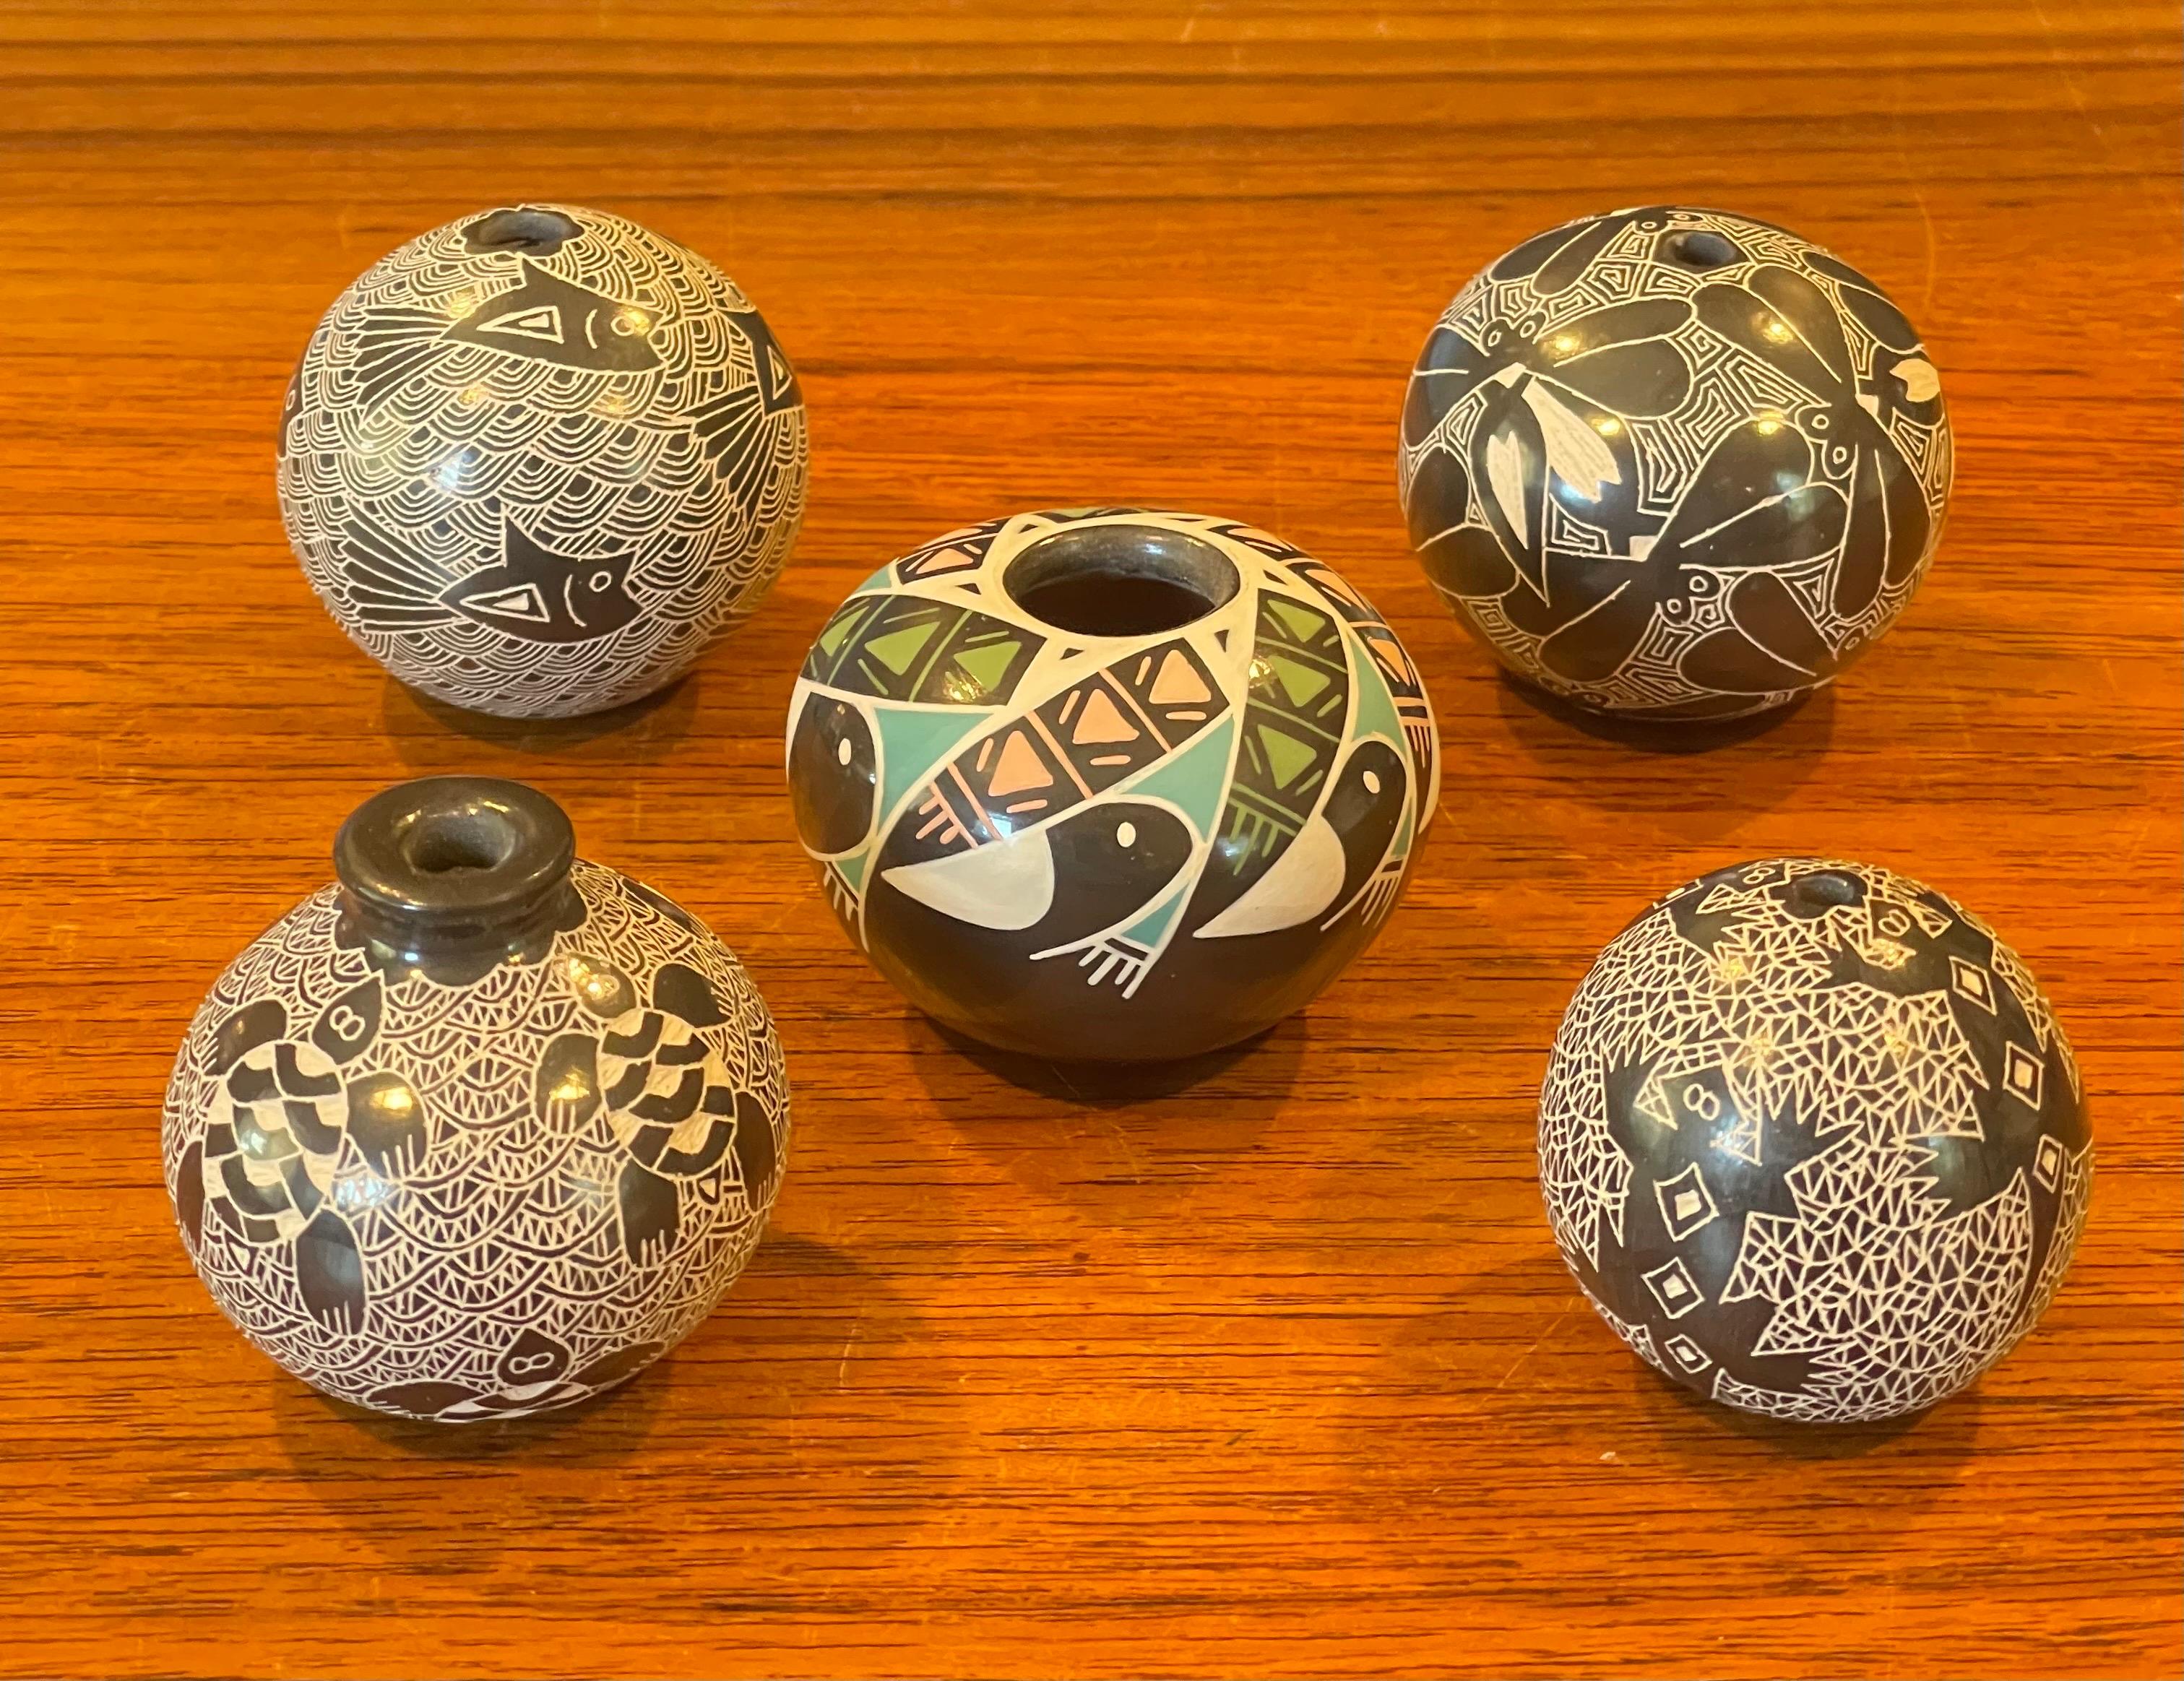 A very nice collection of five miniature Mata Ortiz pottery ollas / seed pots, circa 1990s. Each pot has exquisite detail and is signed on the underside.  They are in very good condition with no chips or cracks and measures a approximately 2